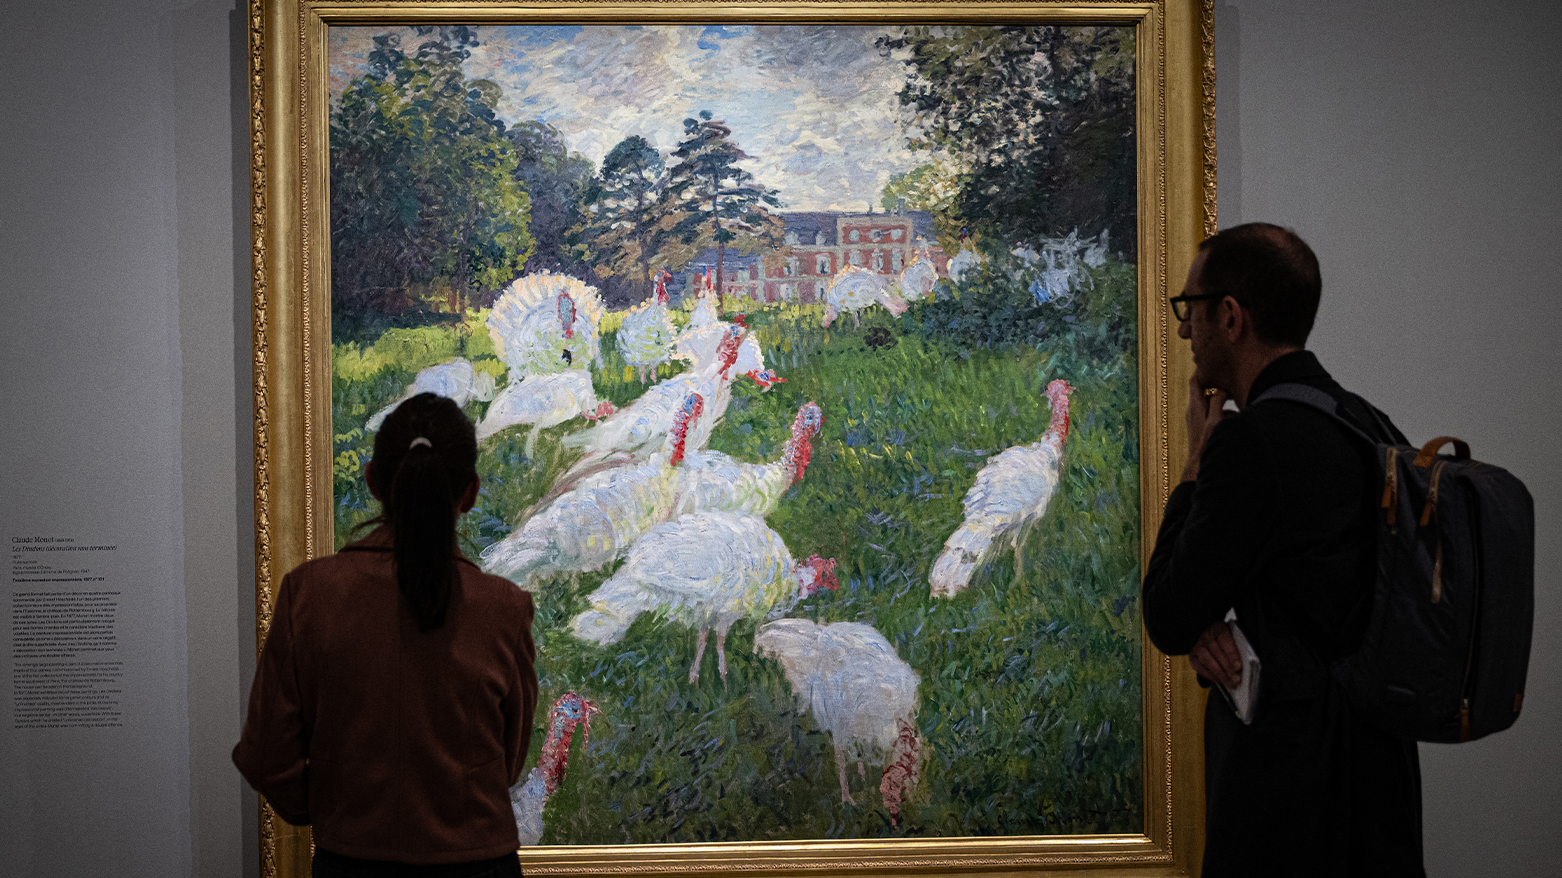 Visitors in front of the painting "Les Dindons" (The Turkeys - 1876) by French impressionist painter Claude Monet (1840-1926), at the Musee d'Orsay in Paris on March 22, 2024. (Photo: MIGUEL MEDINA/AFP)